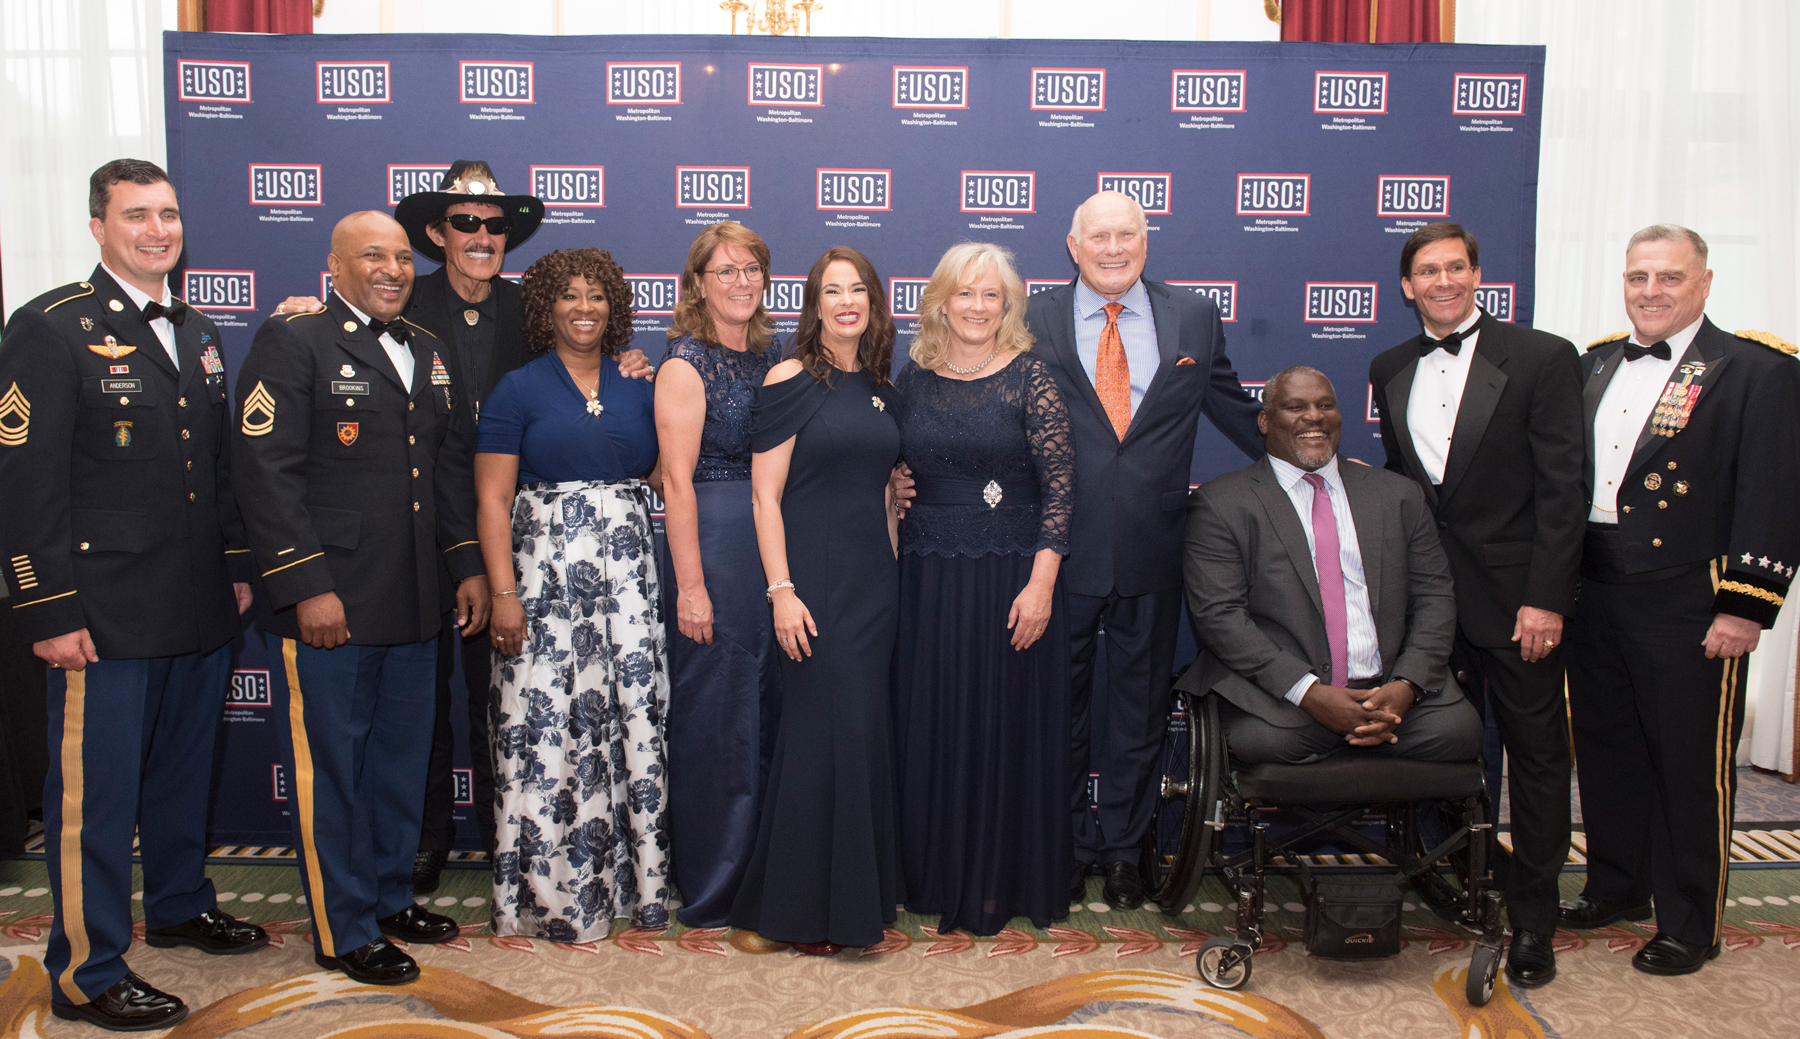 AFI Branch Spouse Winners with Richard Petty, Terry Bradshaw, Mrs. Hollyanne Milley and Gen. Mark Milley Chief of Staff, U.S. Army.